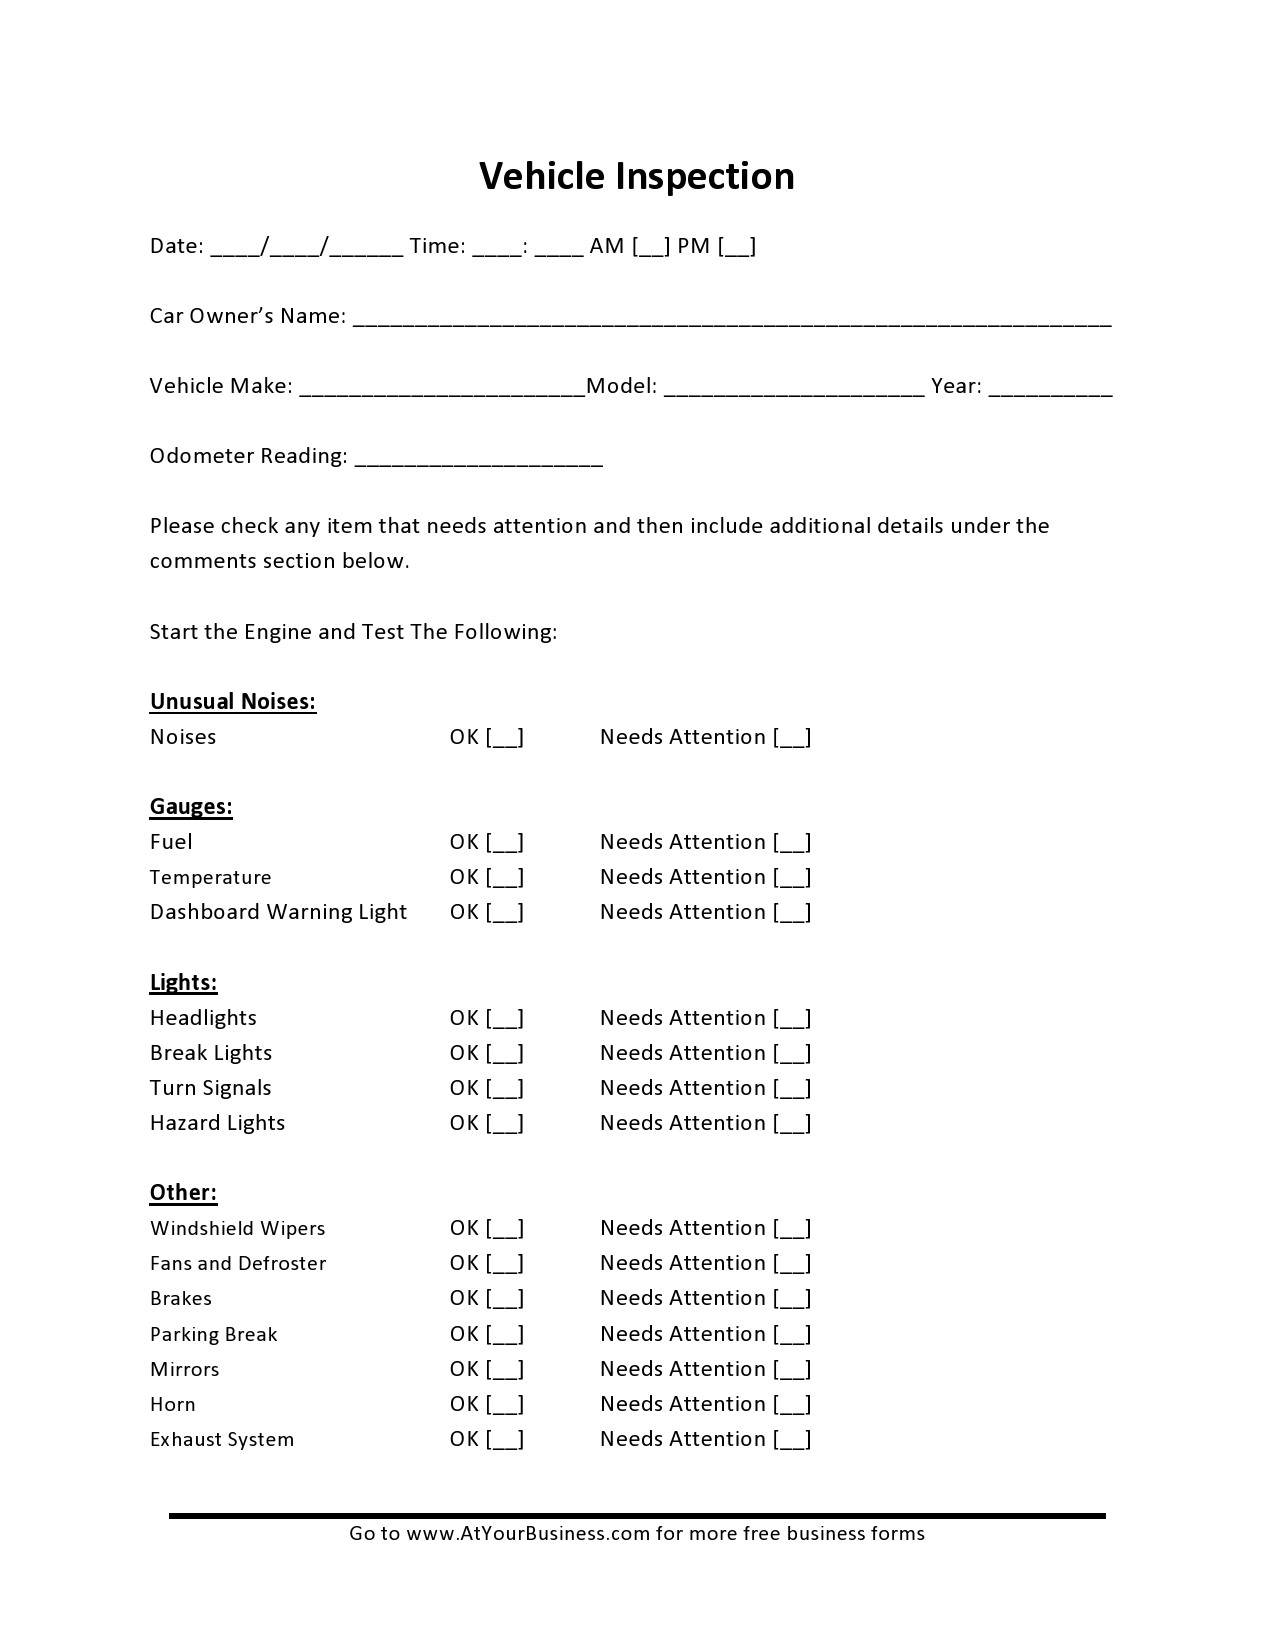 Free vehicle inspection form 03